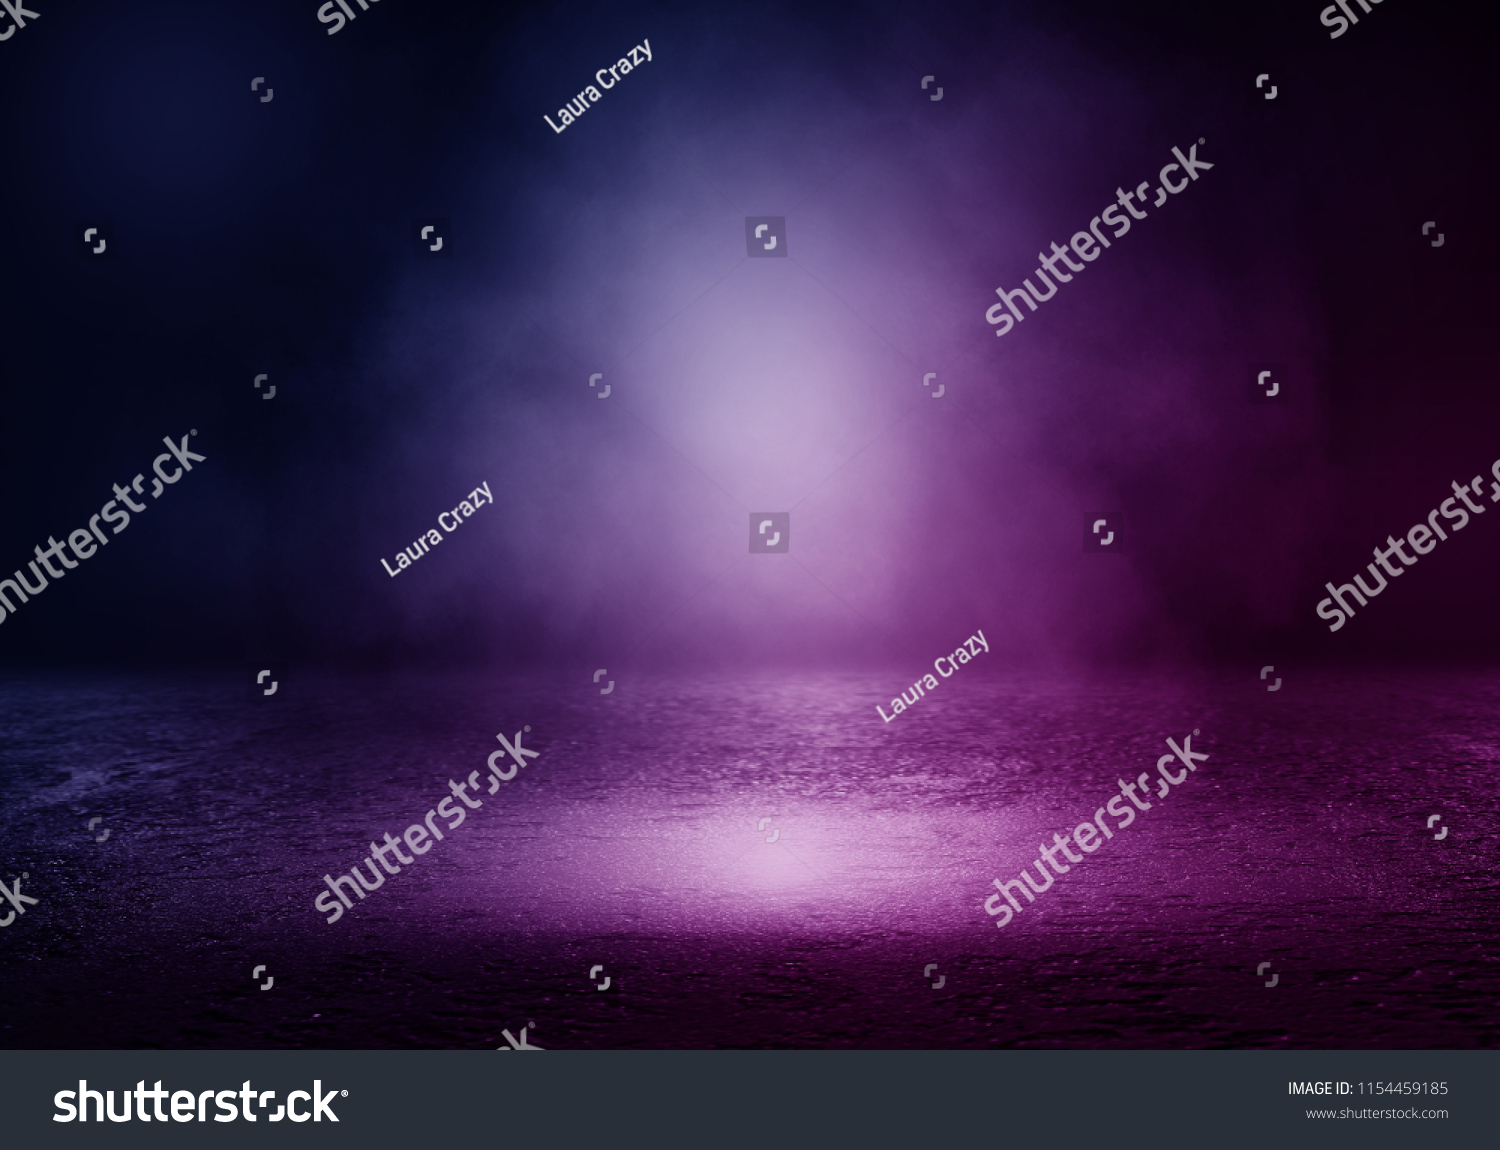 Background of empty room with spotlights and lights, abstract purple background with neon glow #1154459185